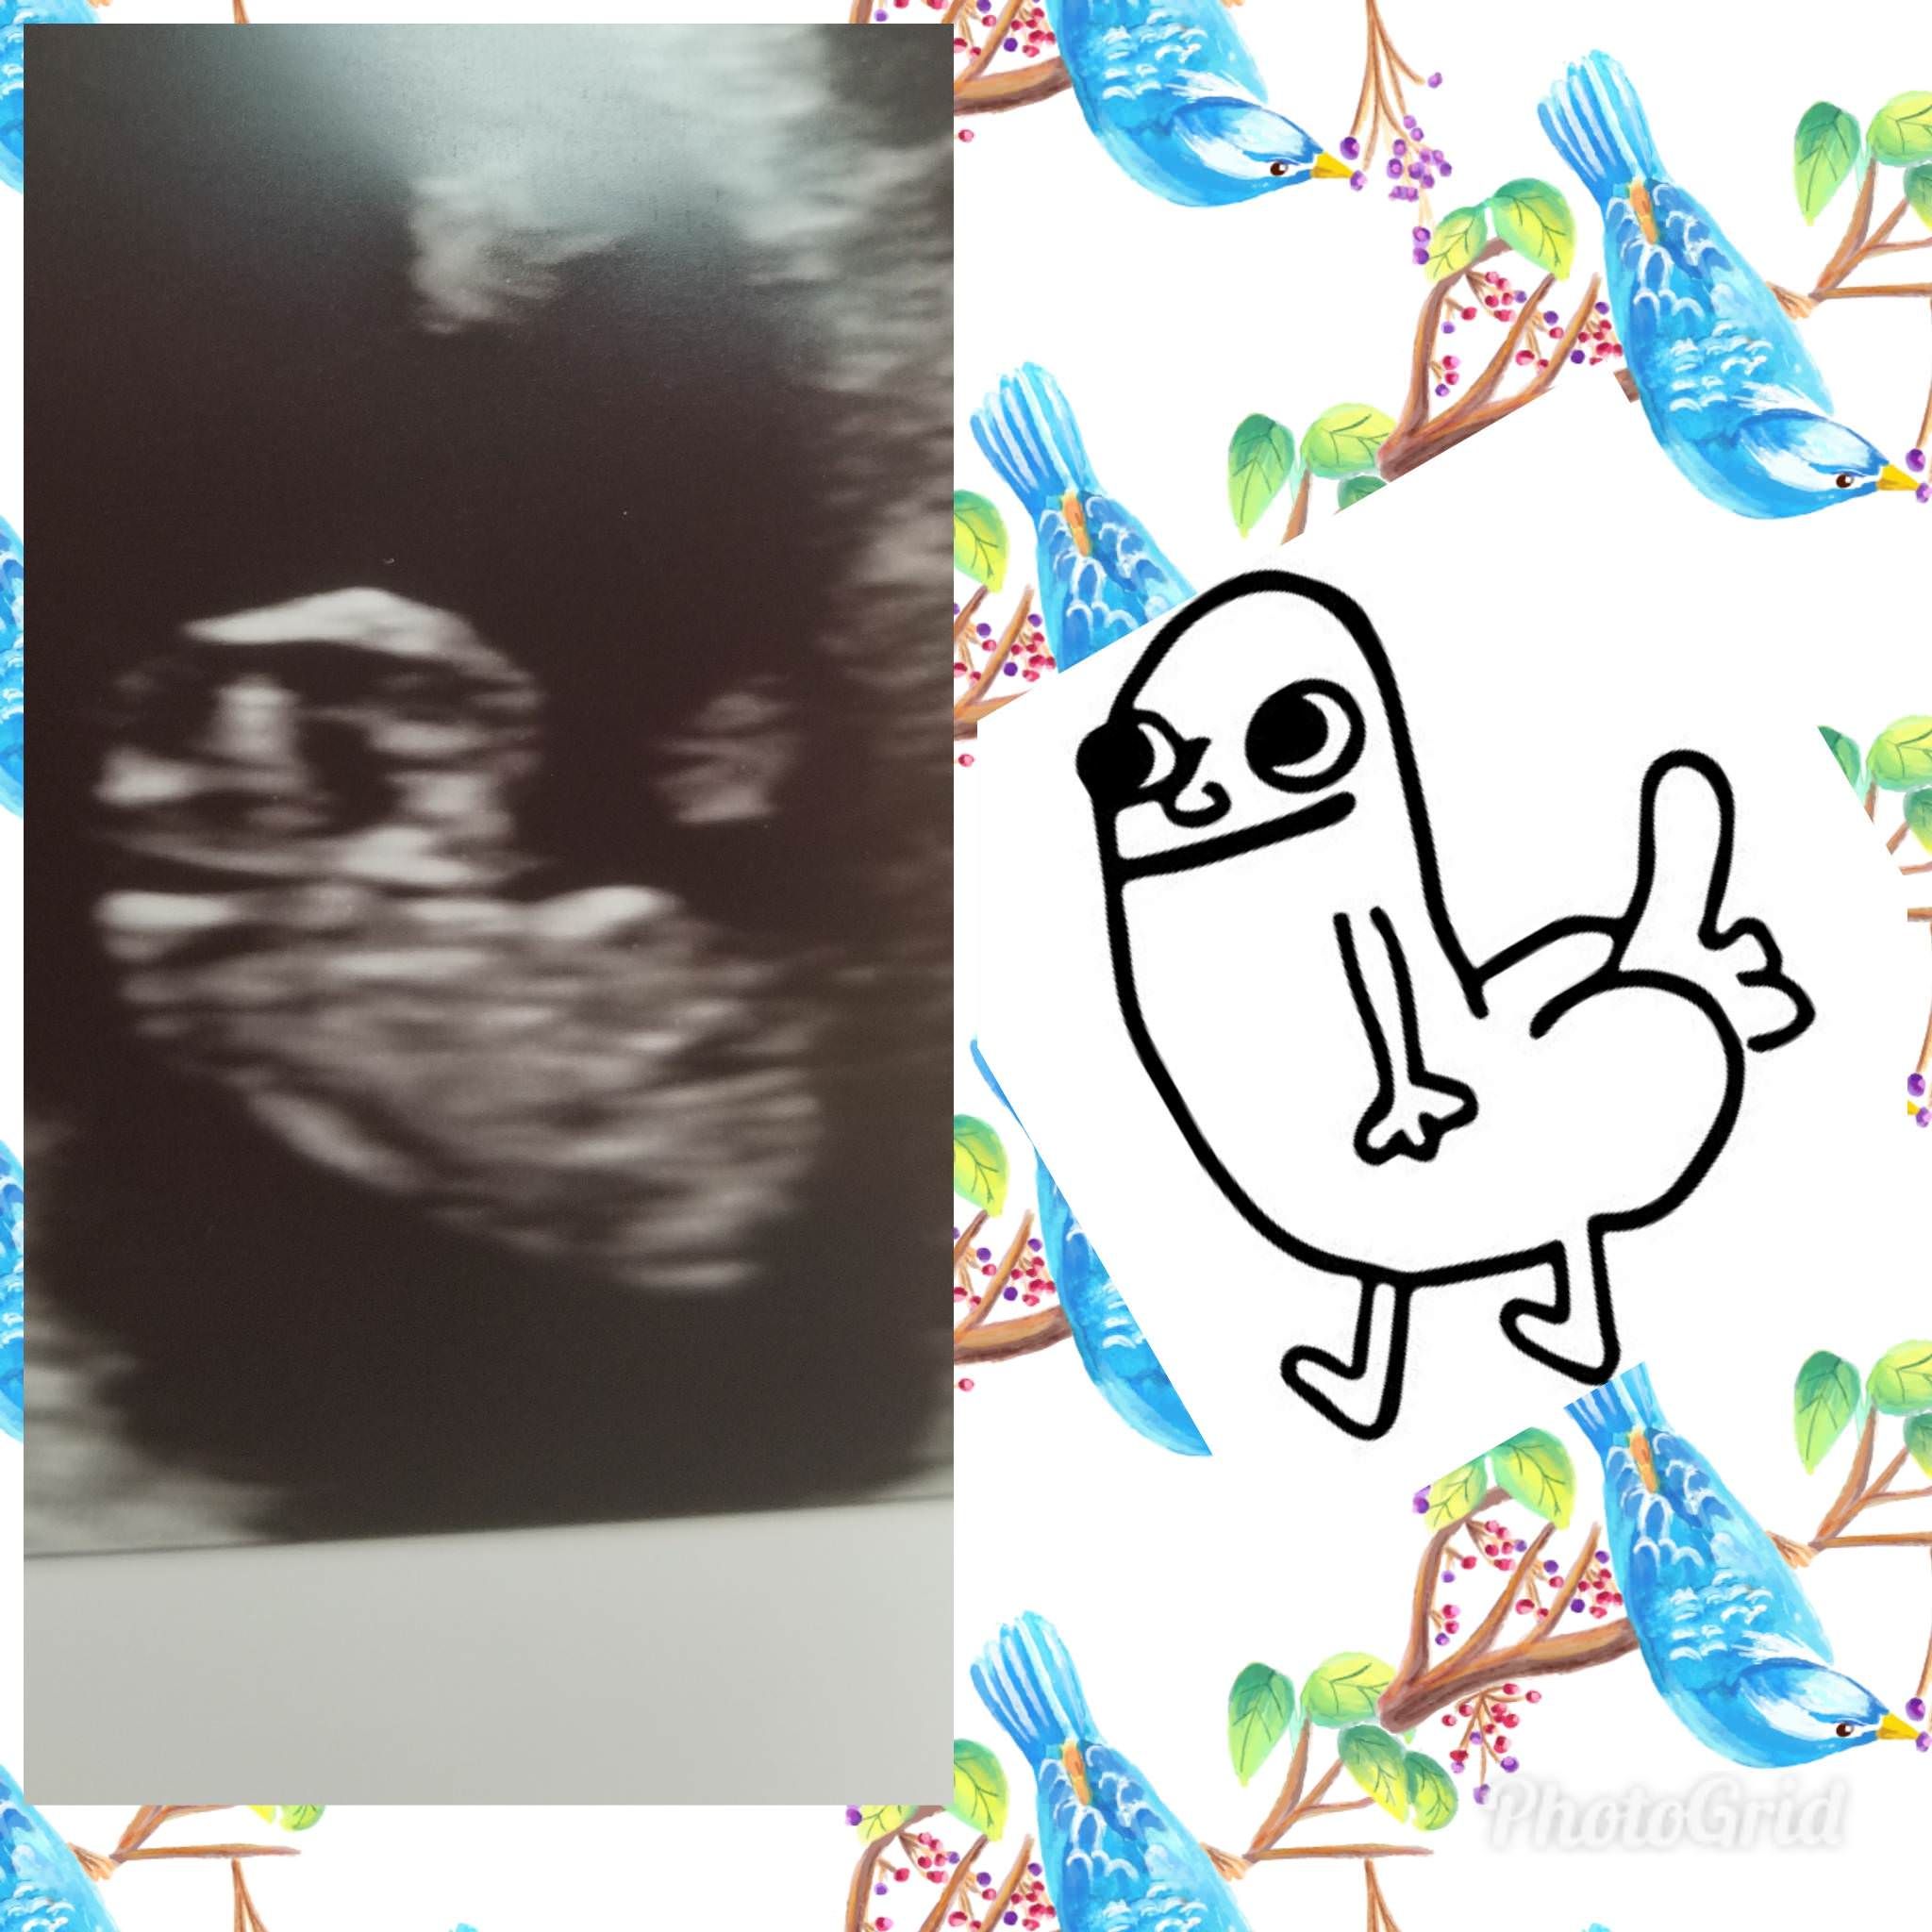 I think I'm pregnant with dickbutt